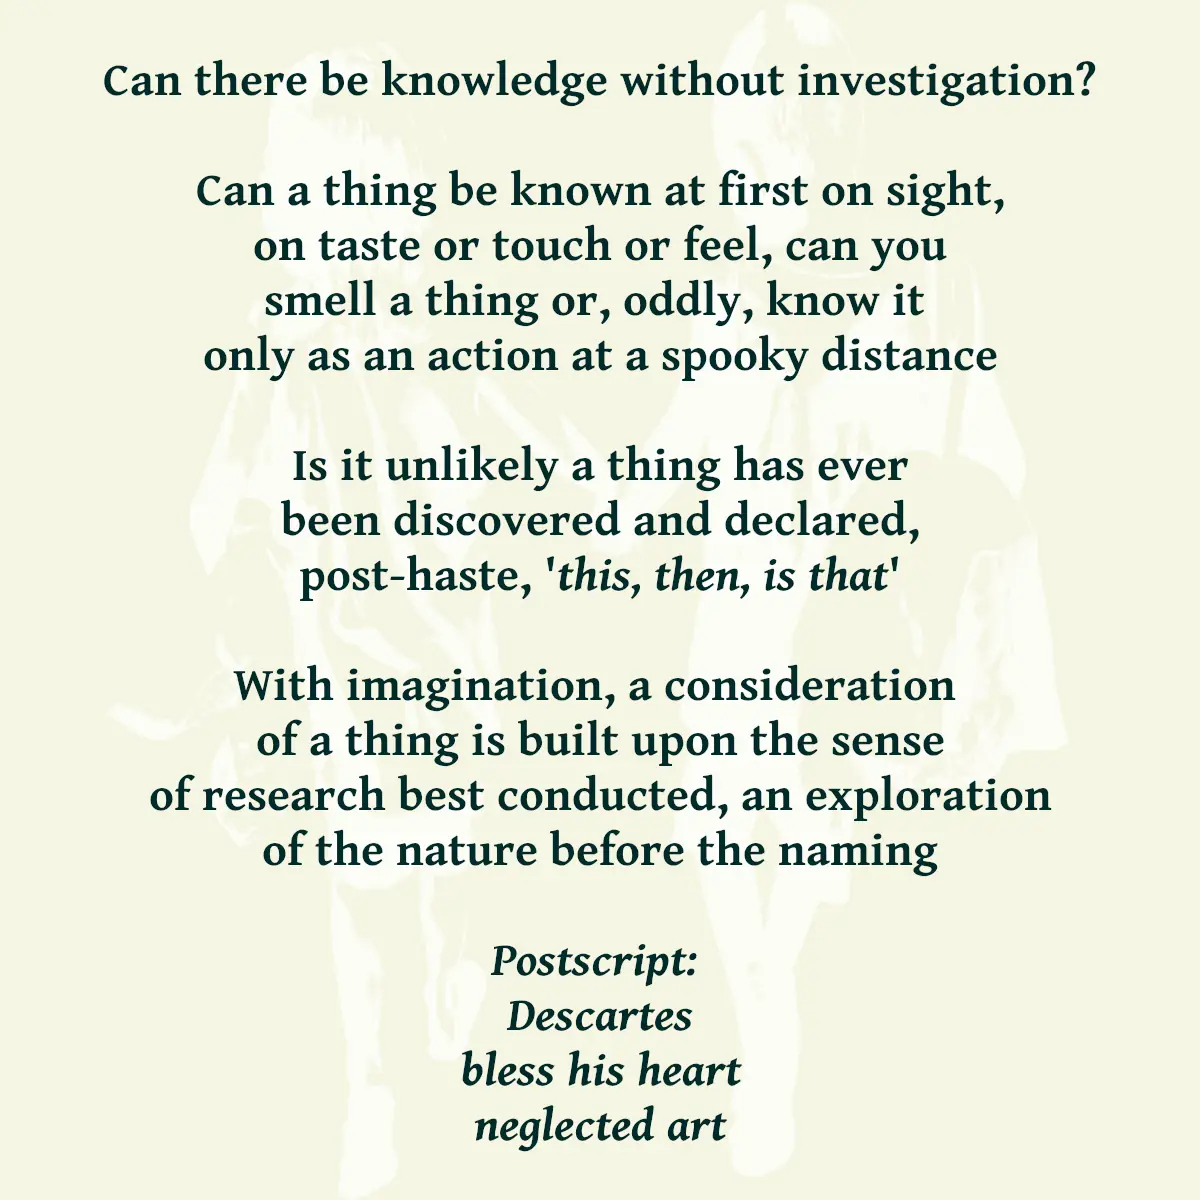 Can there be knowledge without investigation? Can a thing be known at first on sight, on taste or touch or feel, can you smell a thing or, oddly, know it only as an action at a spooky distance Is it unlikely a thing has ever been discovered and declared, post-haste, 'this, then, is that' With imagination, a consideration of a thing is built upon the sense of research best conducted, an exploration of the nature before the naming Postscript: Descartes bless his heart neglected art